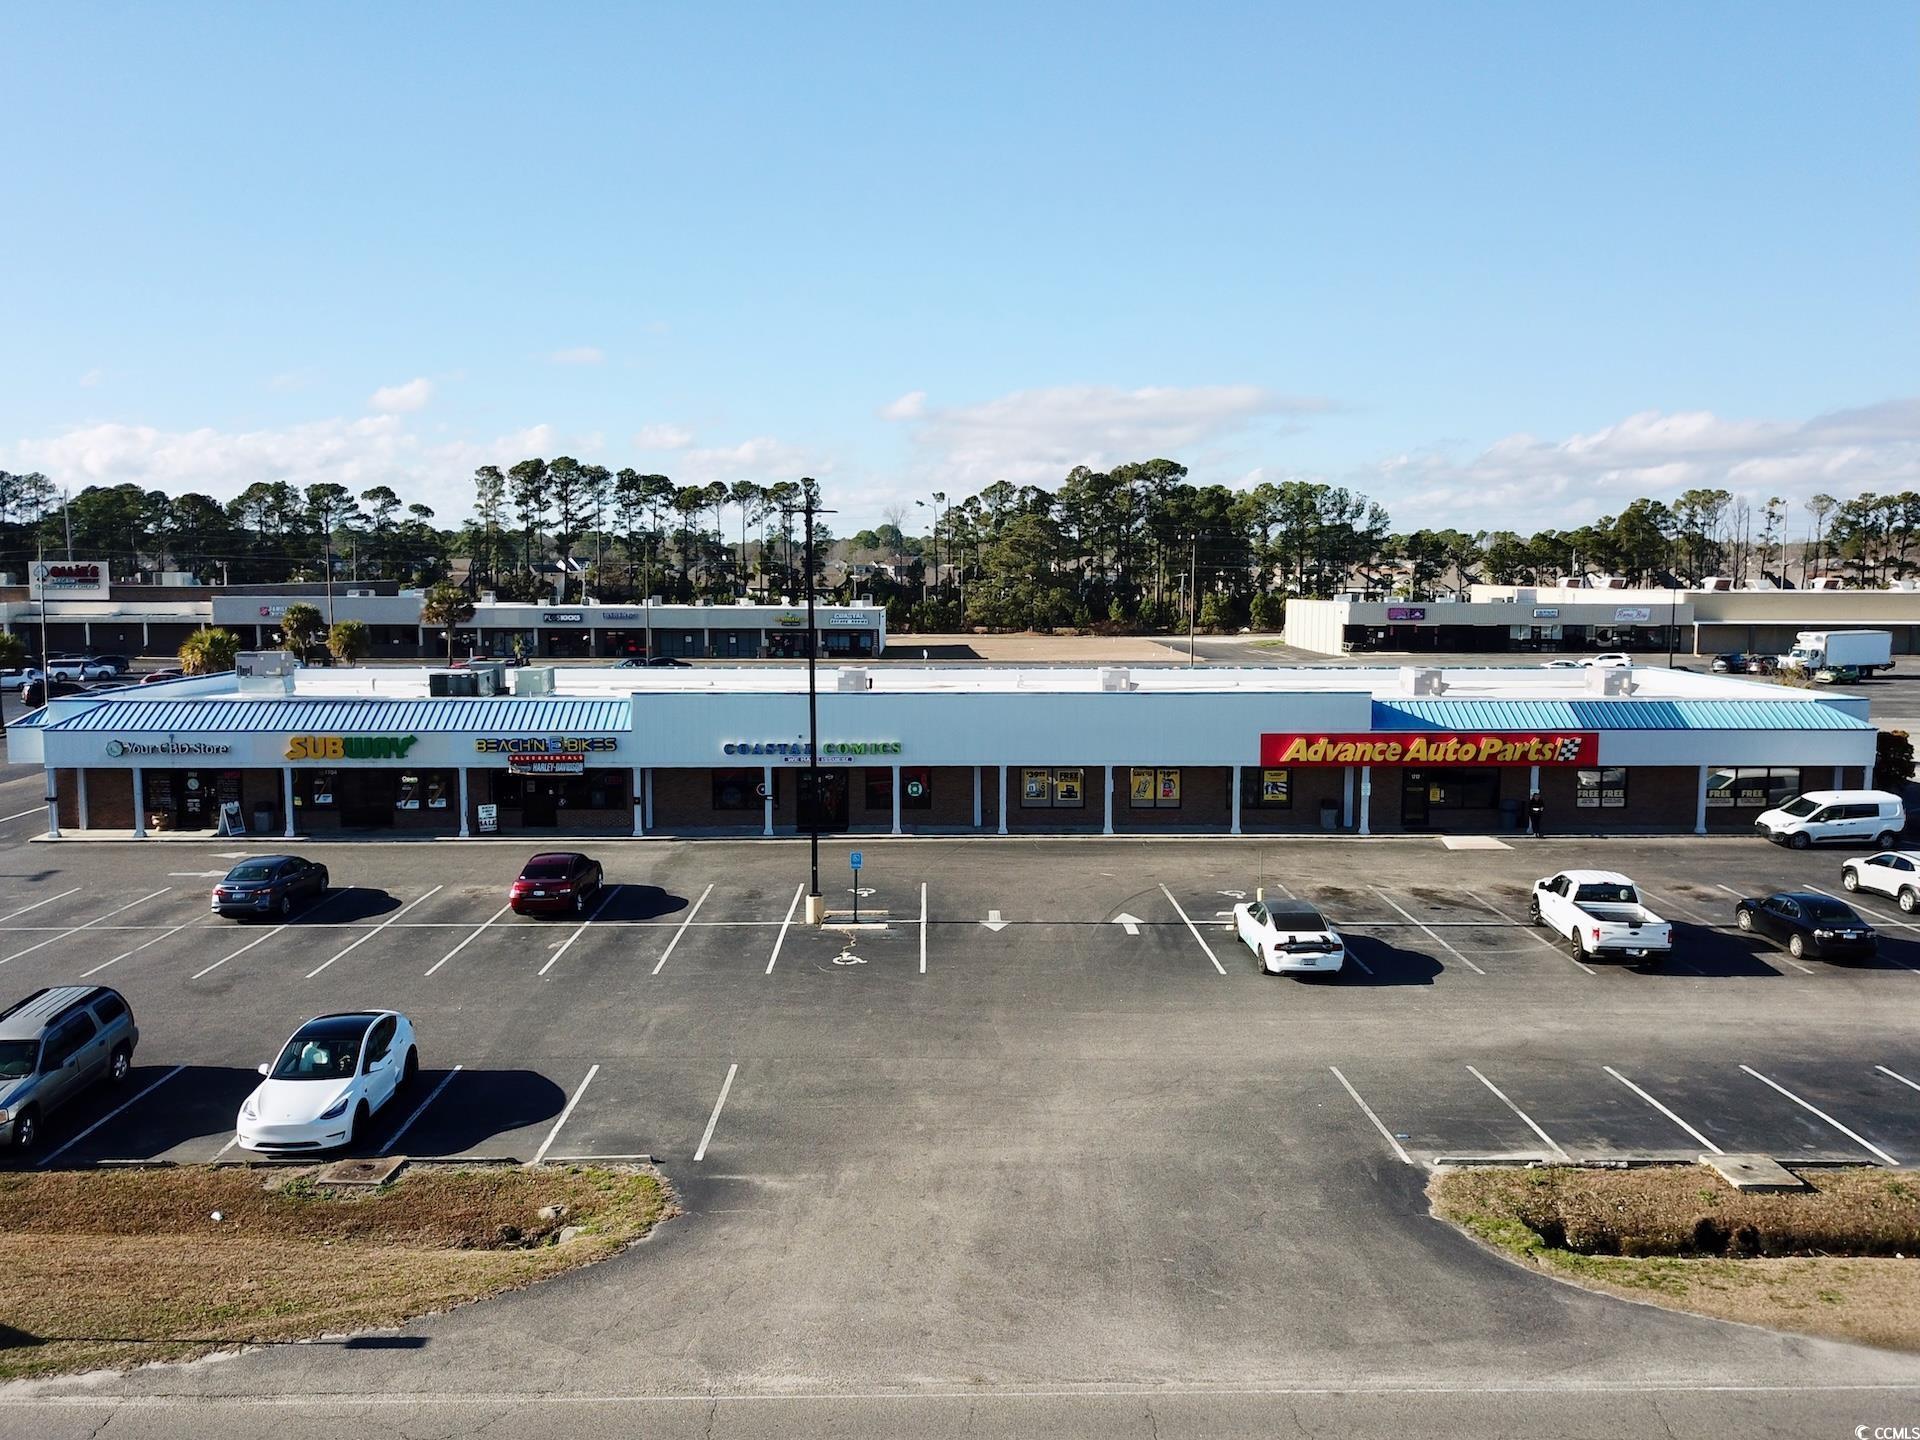 for lease:  1,723 sf in-line retail space  in outparcel strip center at deerfield plaza, a shopping center anchored by old time pottery, ollie's bargain outlet, harbor freight tools & advance auto located in the surfside beach submarket (not in city limits of surfside beach; under horry county jurisdiction) just south of hwy 544.  strong demographics with permanent population of 81,500 within 5 miles. deerfield plaza has excellent visibility and ingress/egress from hwy 17 business and is conveniently located less than 1 mile from the atlantic ocean and oceanfront campgrounds.  adt is 31,000 (scdot 2022).